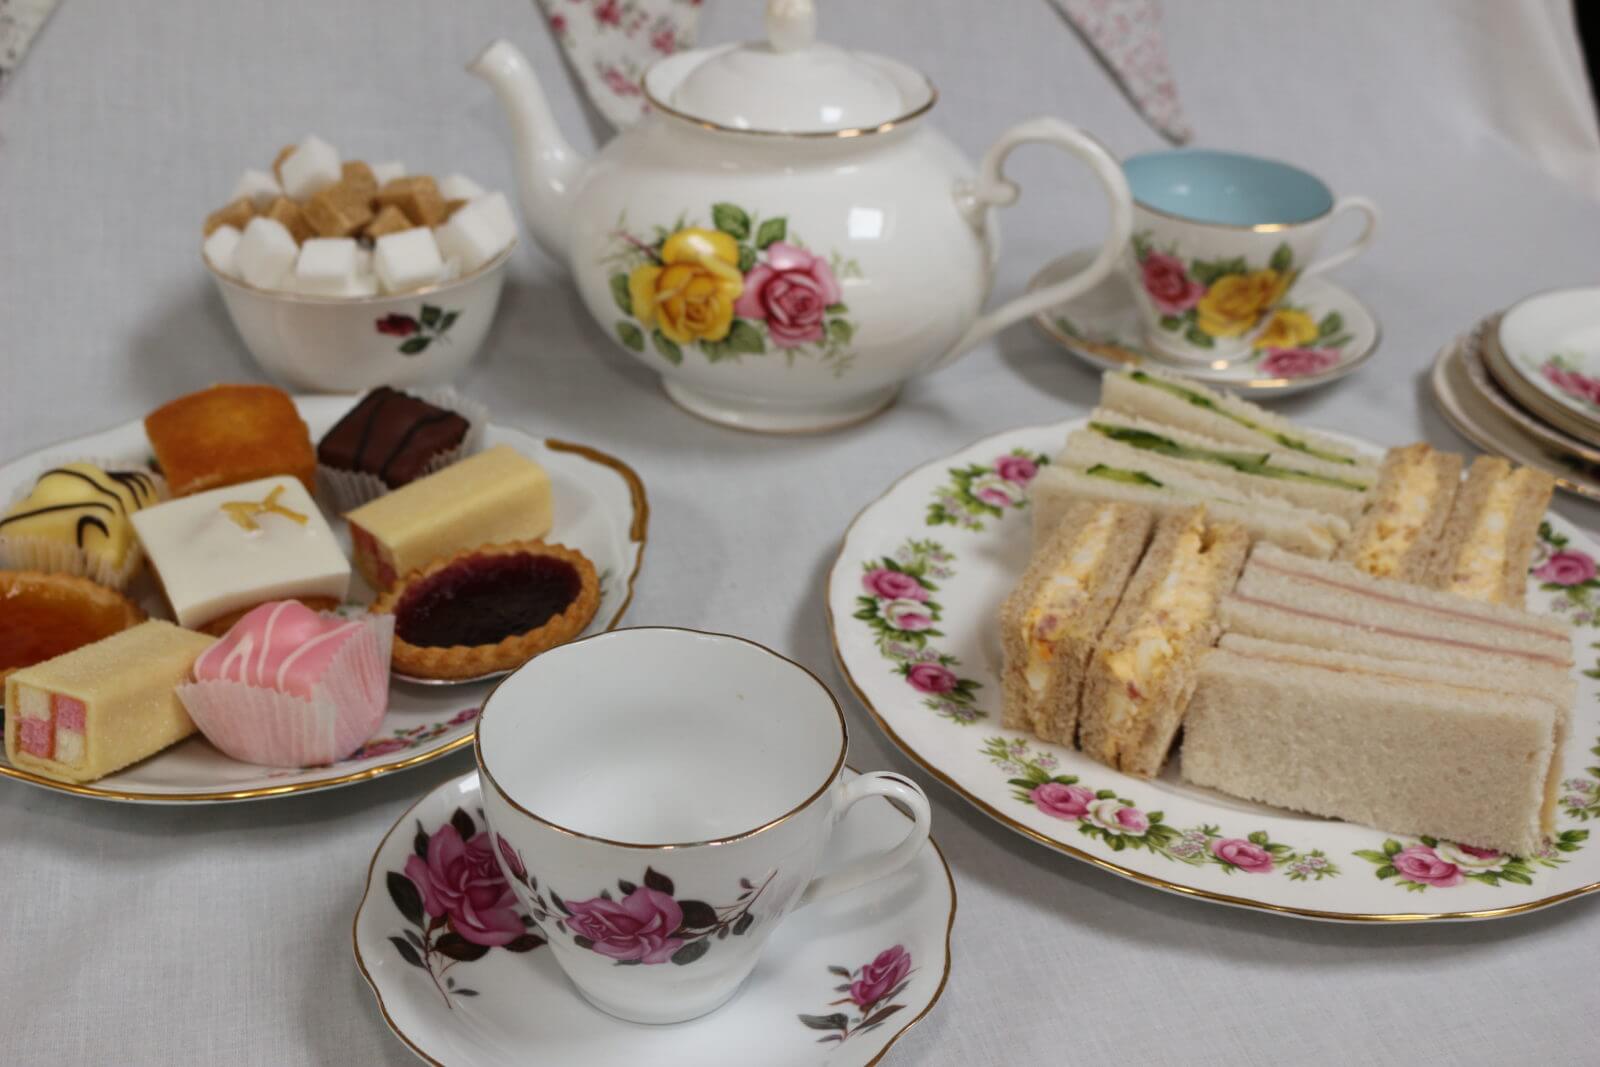 10 Fabulous Ideas For Your Afternoon Tea Party Derby Vintage China Hire